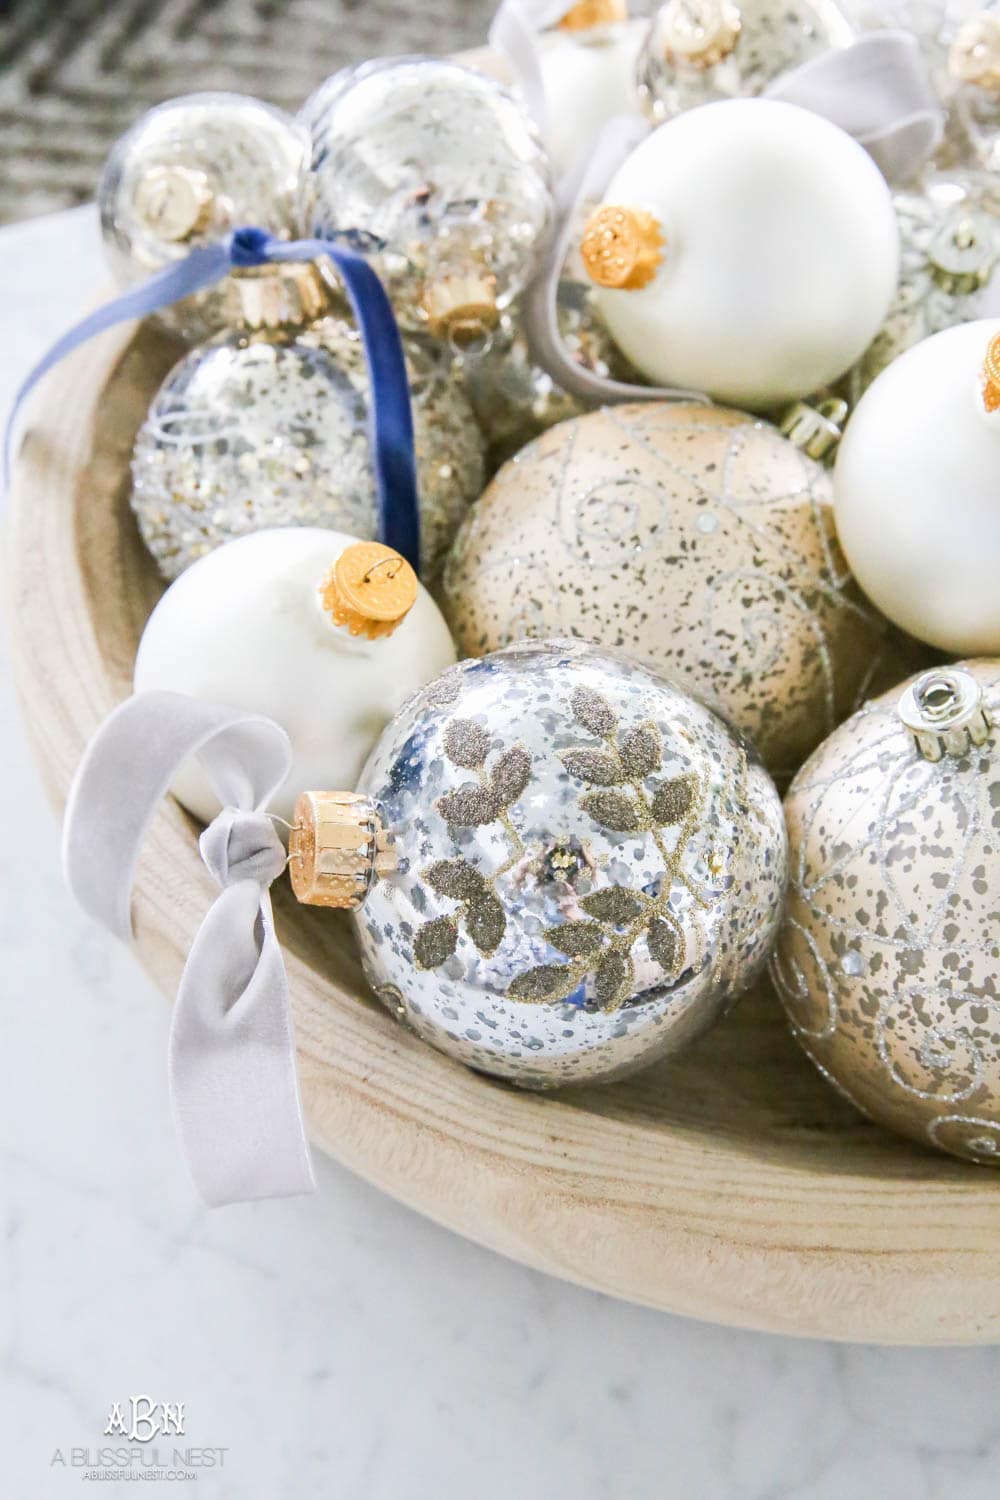 Mercury glass ornaments with velvet ribbons tied and collected in a wood bowl on a coffee table for a gorgeous holiday décor display. Simple touches for Christmas décor that make big impact. Check out all the white, silver and gold Christmas decor in this holiday home tour on ABlissfulNest.com. #ABlissfulNest #Christmasdecor #Christmasdecorating #CoastalChristmasdecor #christmastree #christmasmantle